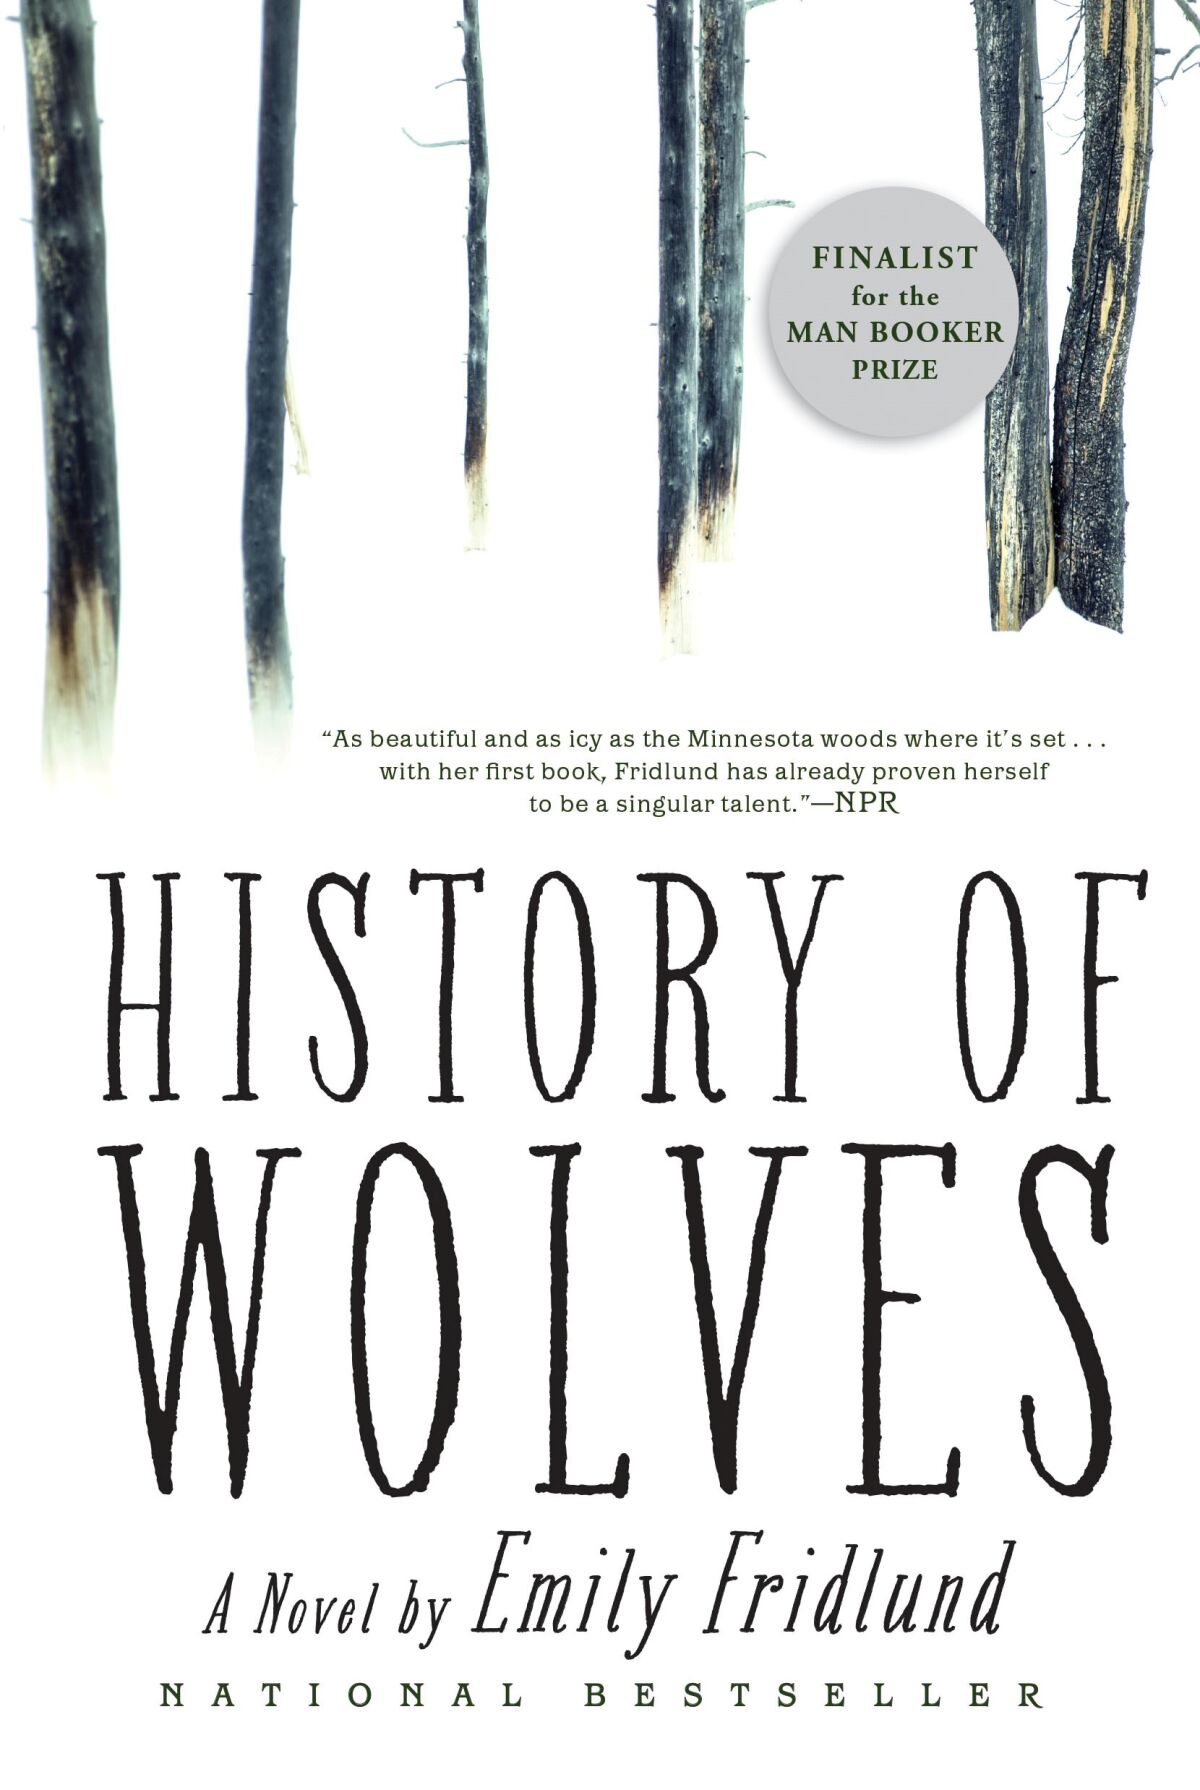 "History of Wolves" by Emily Fridlund